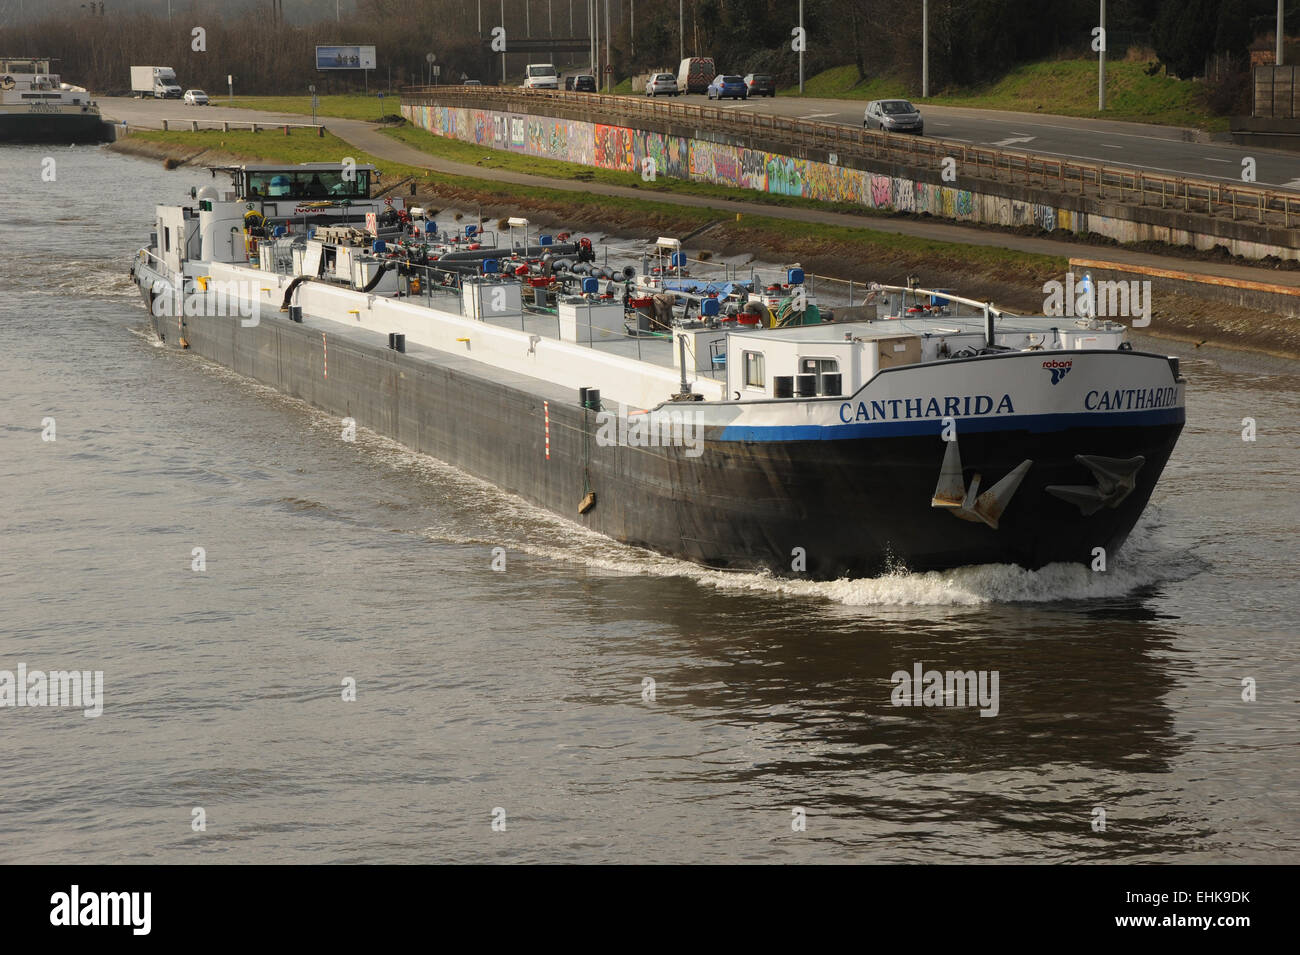 A canal barge underway on the main canal near Mons, belgium. this barge is a fuel tender, typical of the transport vessels found Stock Photo